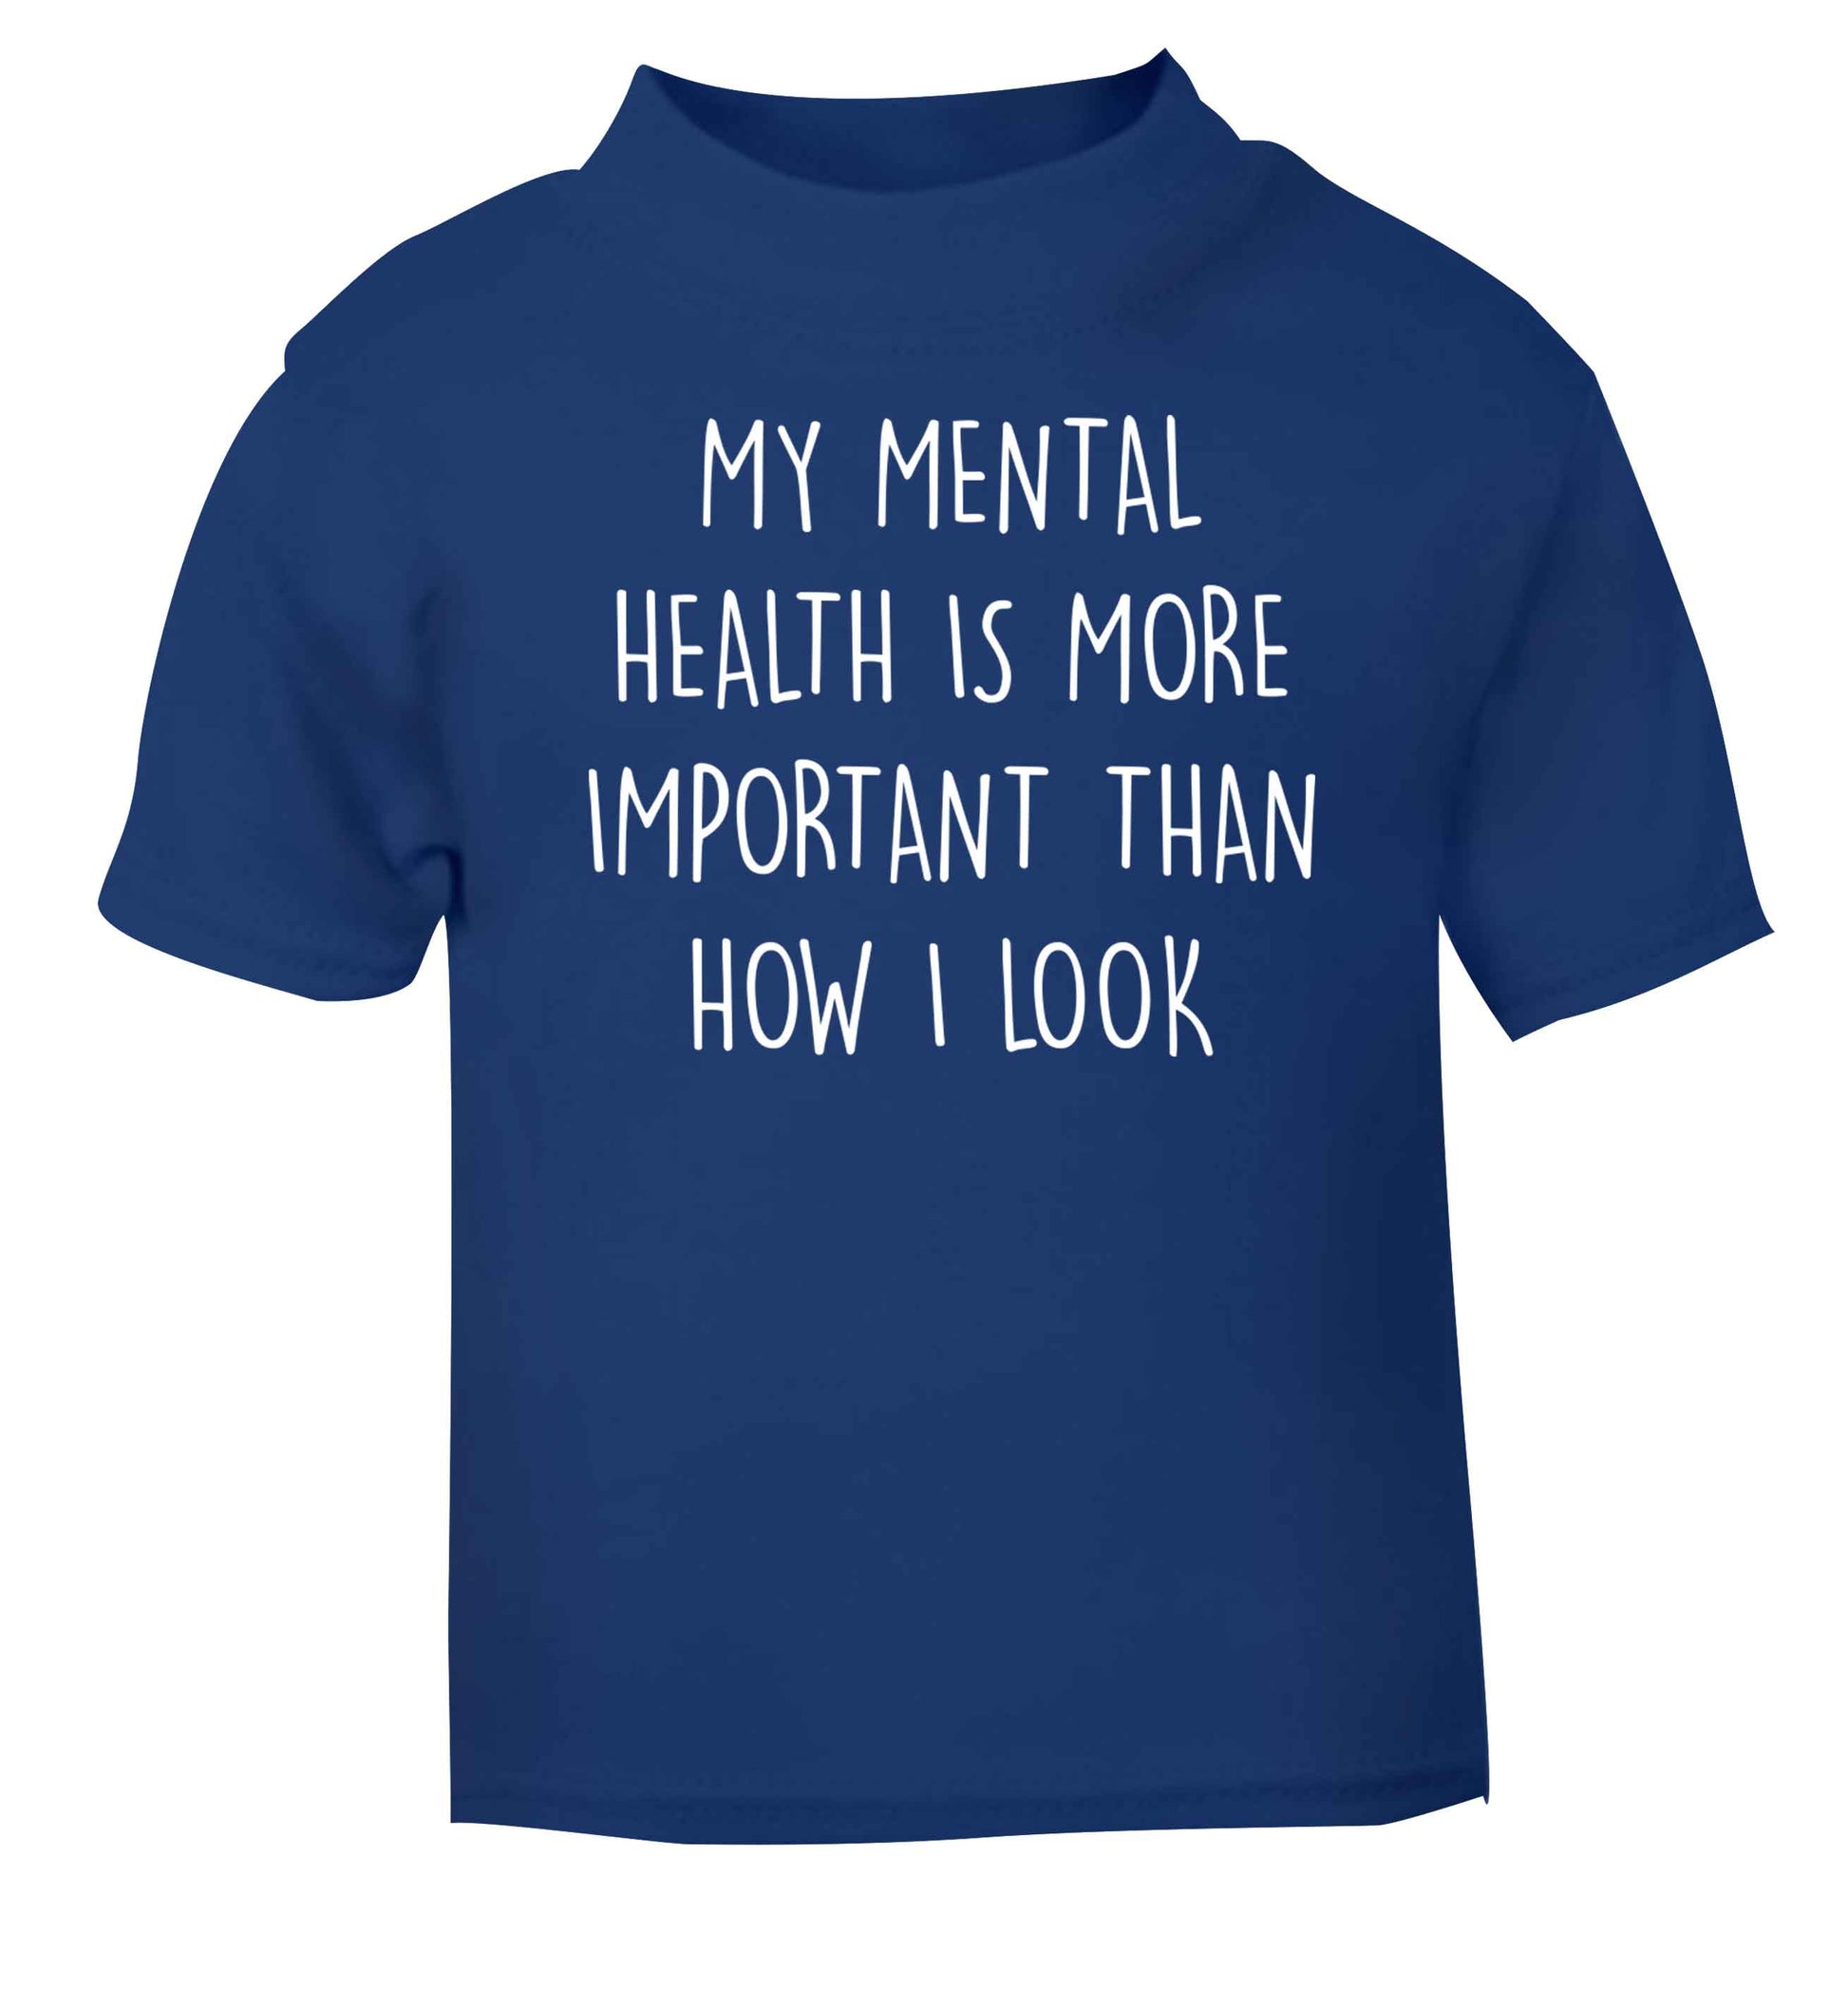 My mental health is more importnat than how I look blue baby toddler Tshirt 2 Years